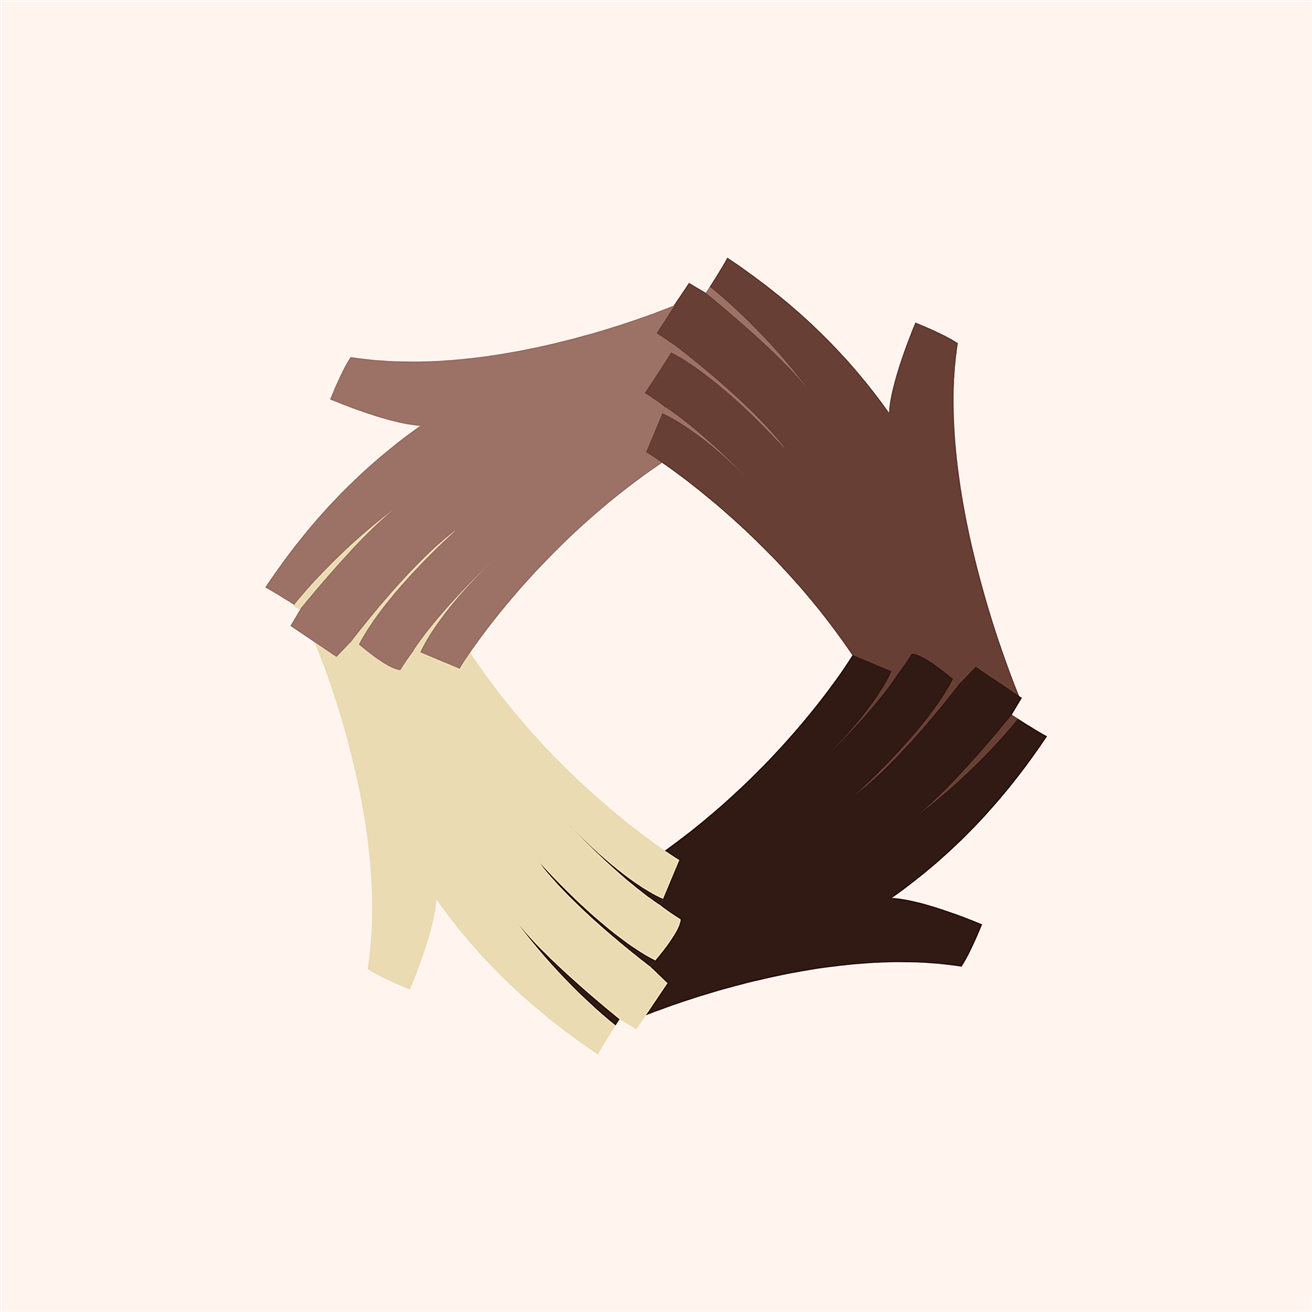 digital image of four hands holding each other in a circle of different skin tones 